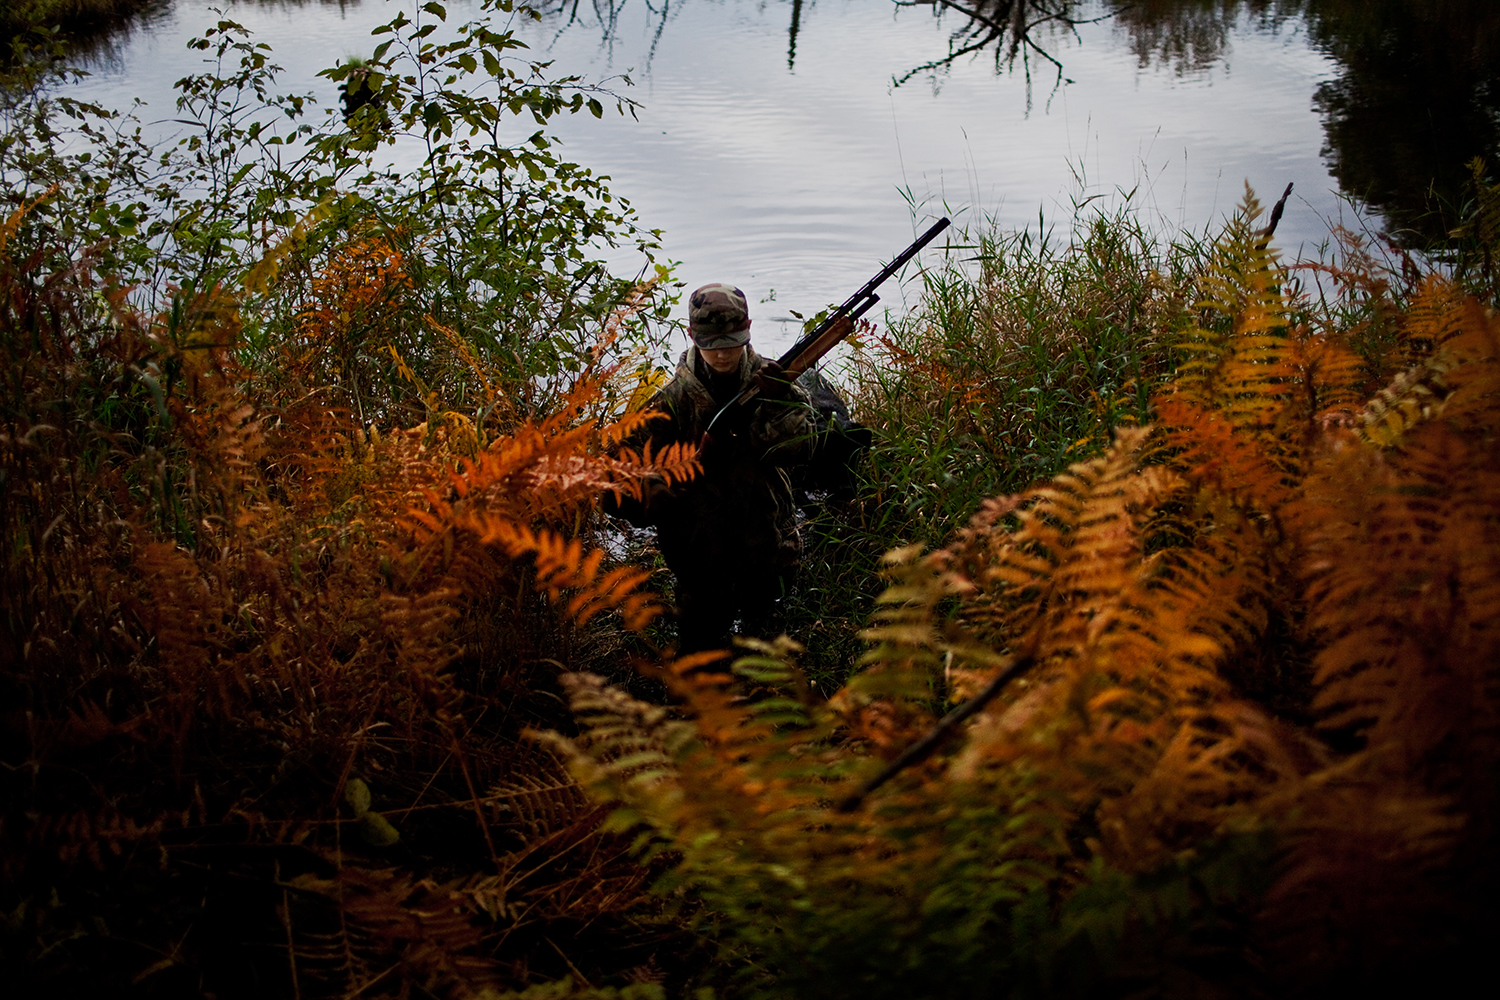  Isaac Eisch climbs out of the pond while duck hunting with their uncle in Wautoma, Wis. Thanks to their uncle, the brothers are introduced to a routined schedule and are kept busy with outdoor activities, while their father is deployed in Afghanista